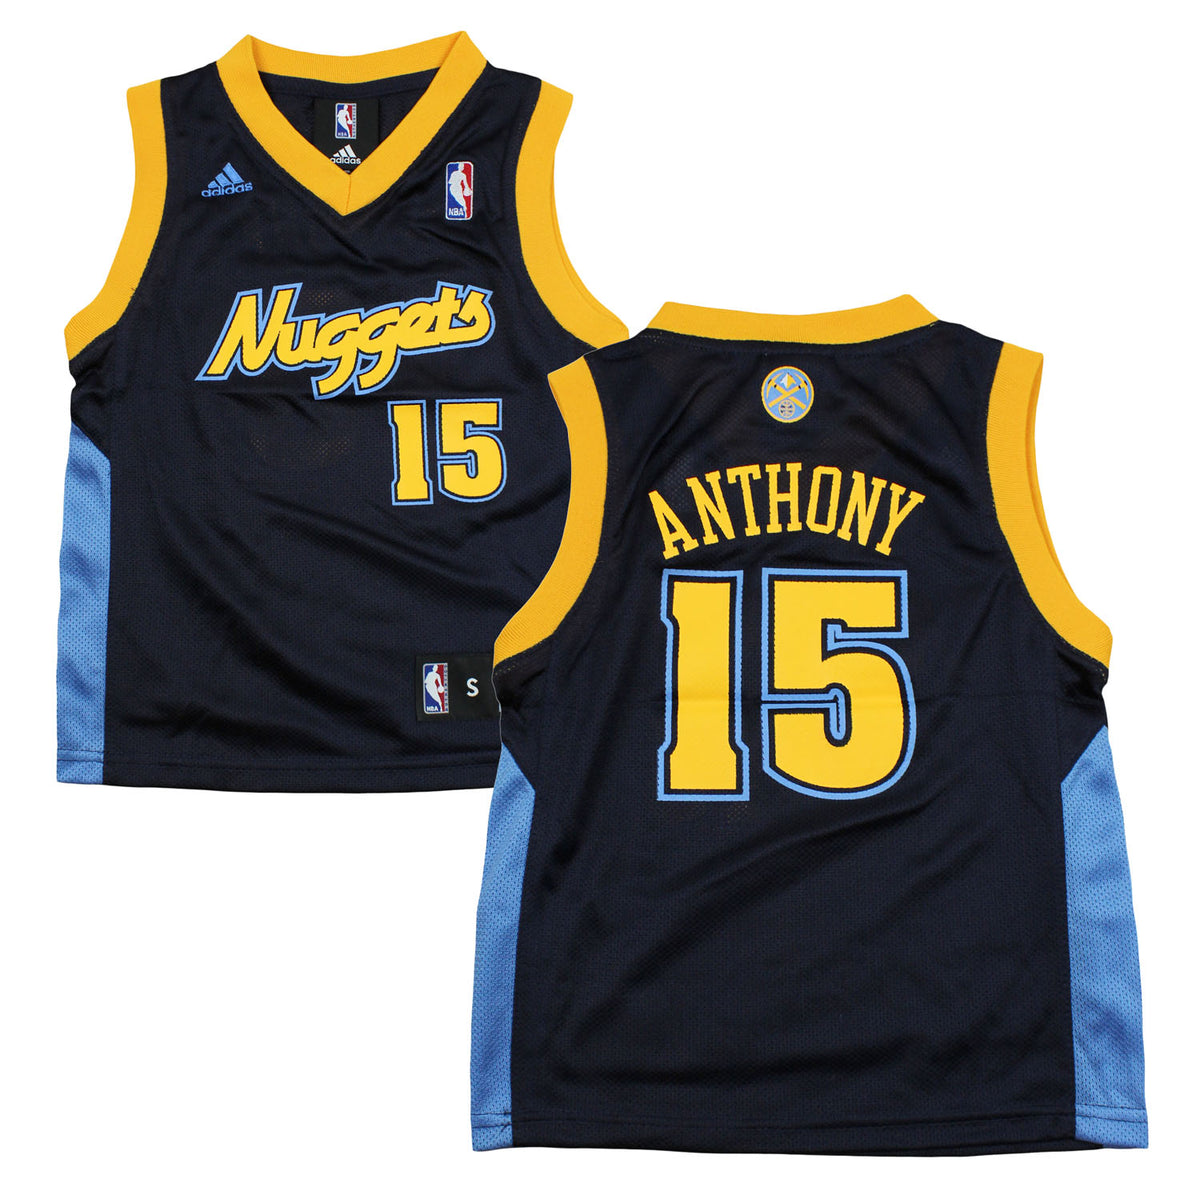 melo jersey nuggets